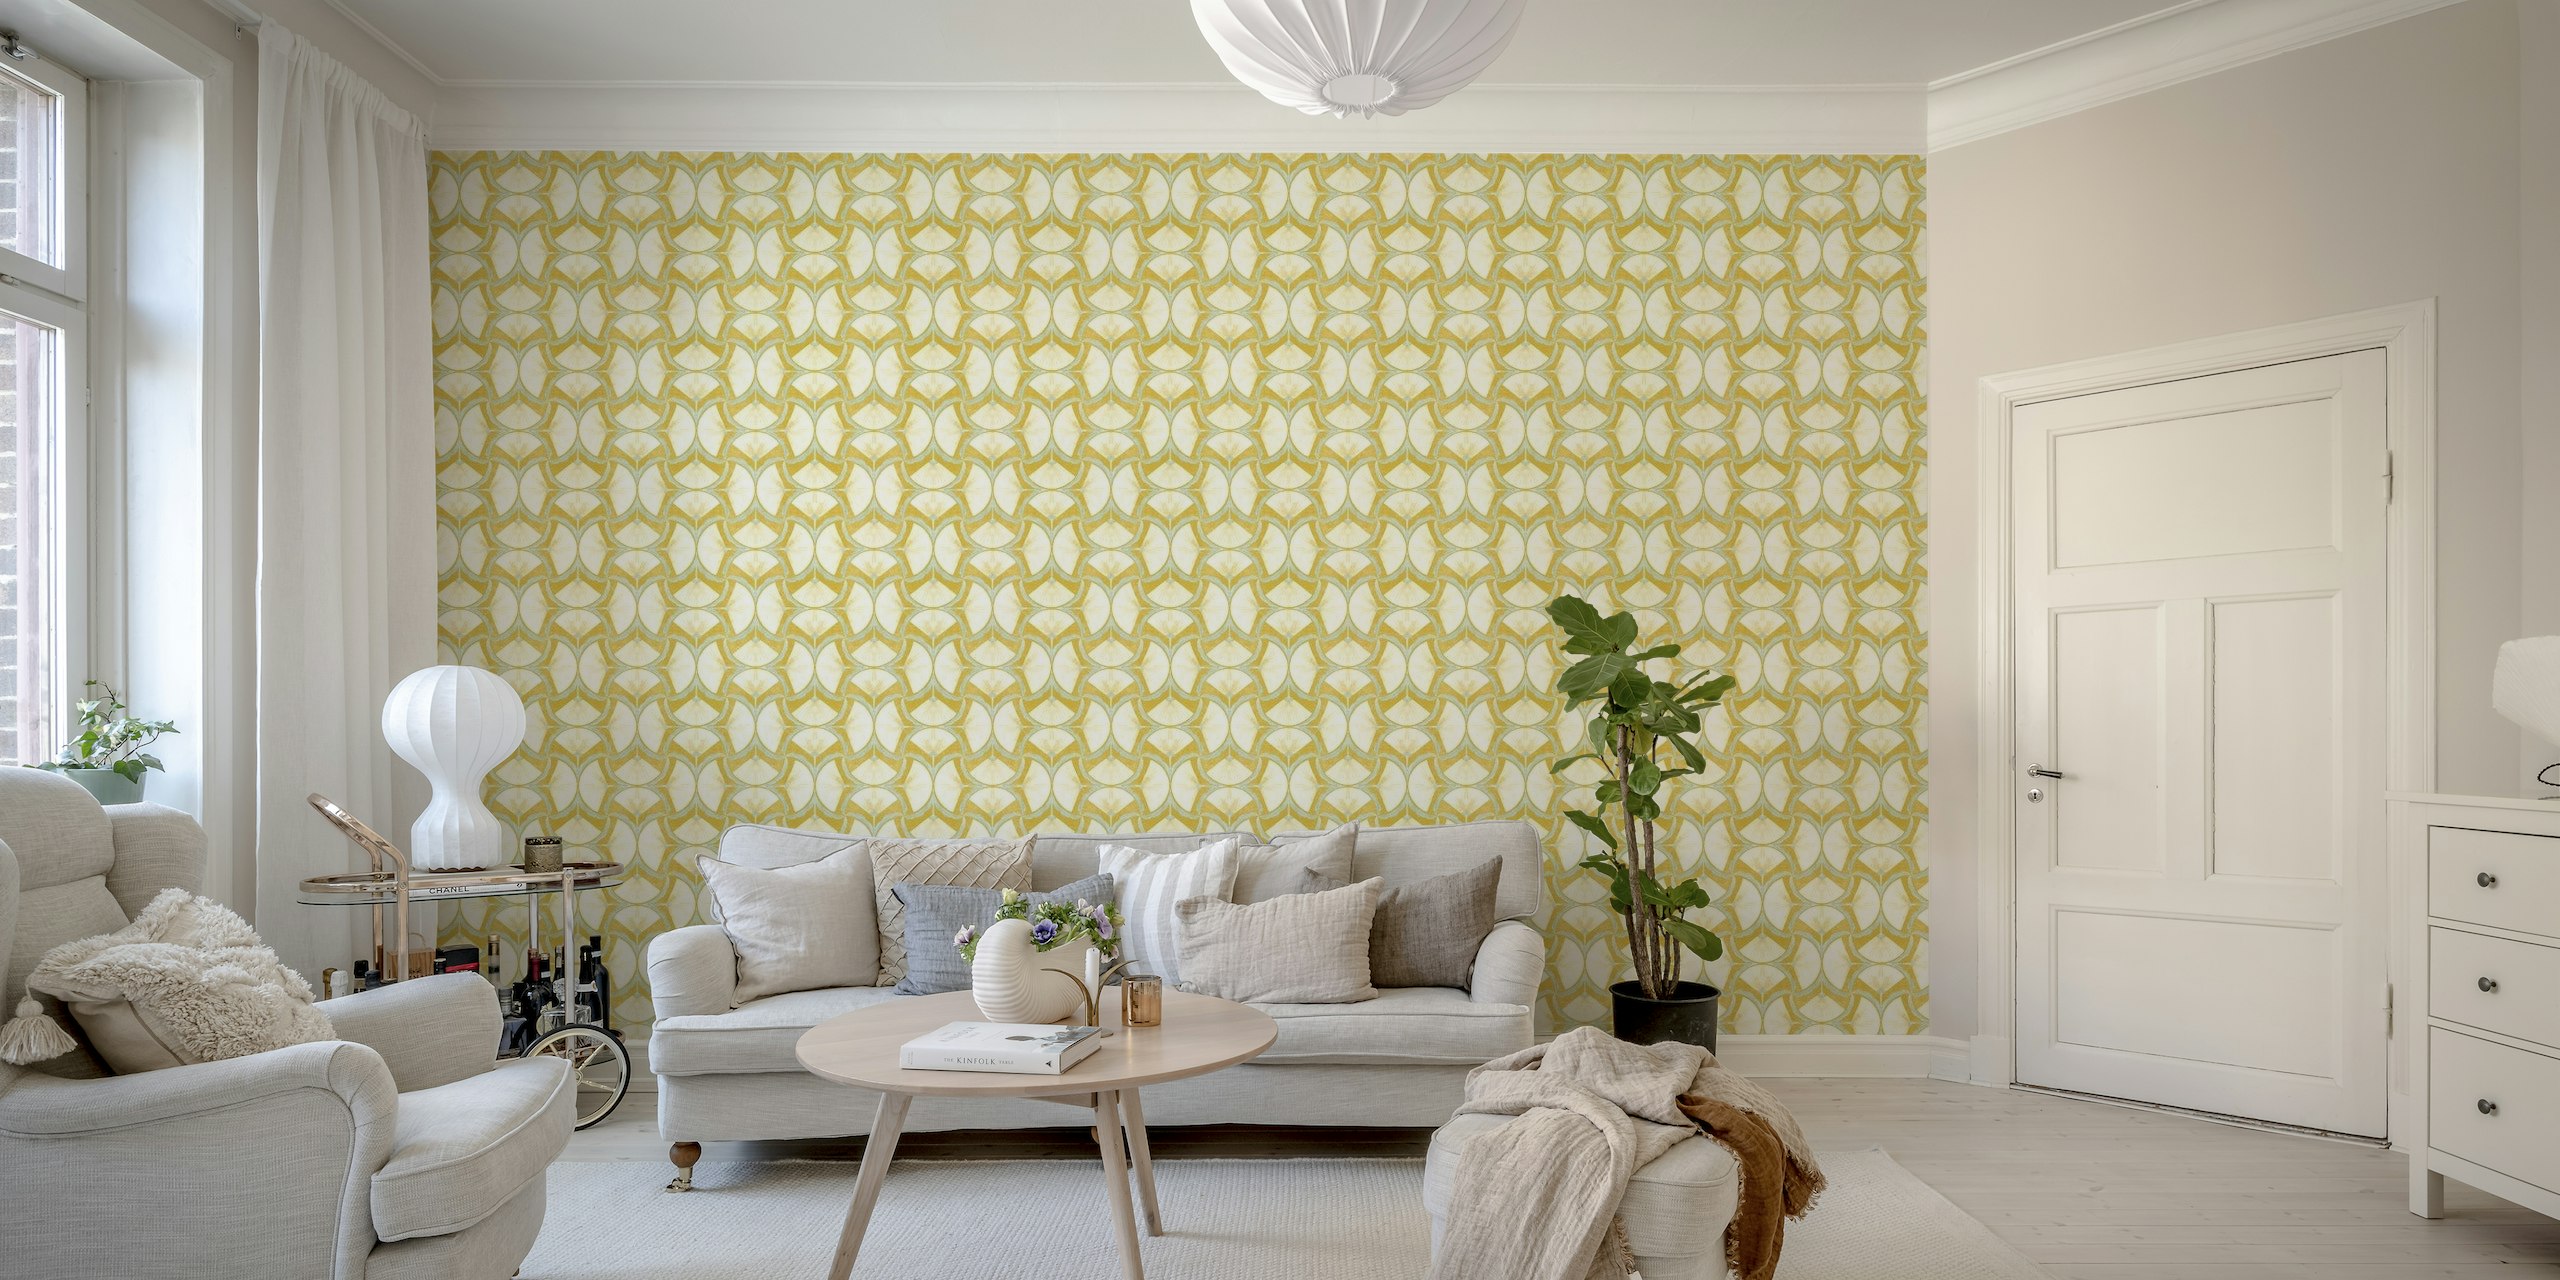 Floral Harmony: Delicate Hand-Drawn Symmetry on mustard background wallpaper